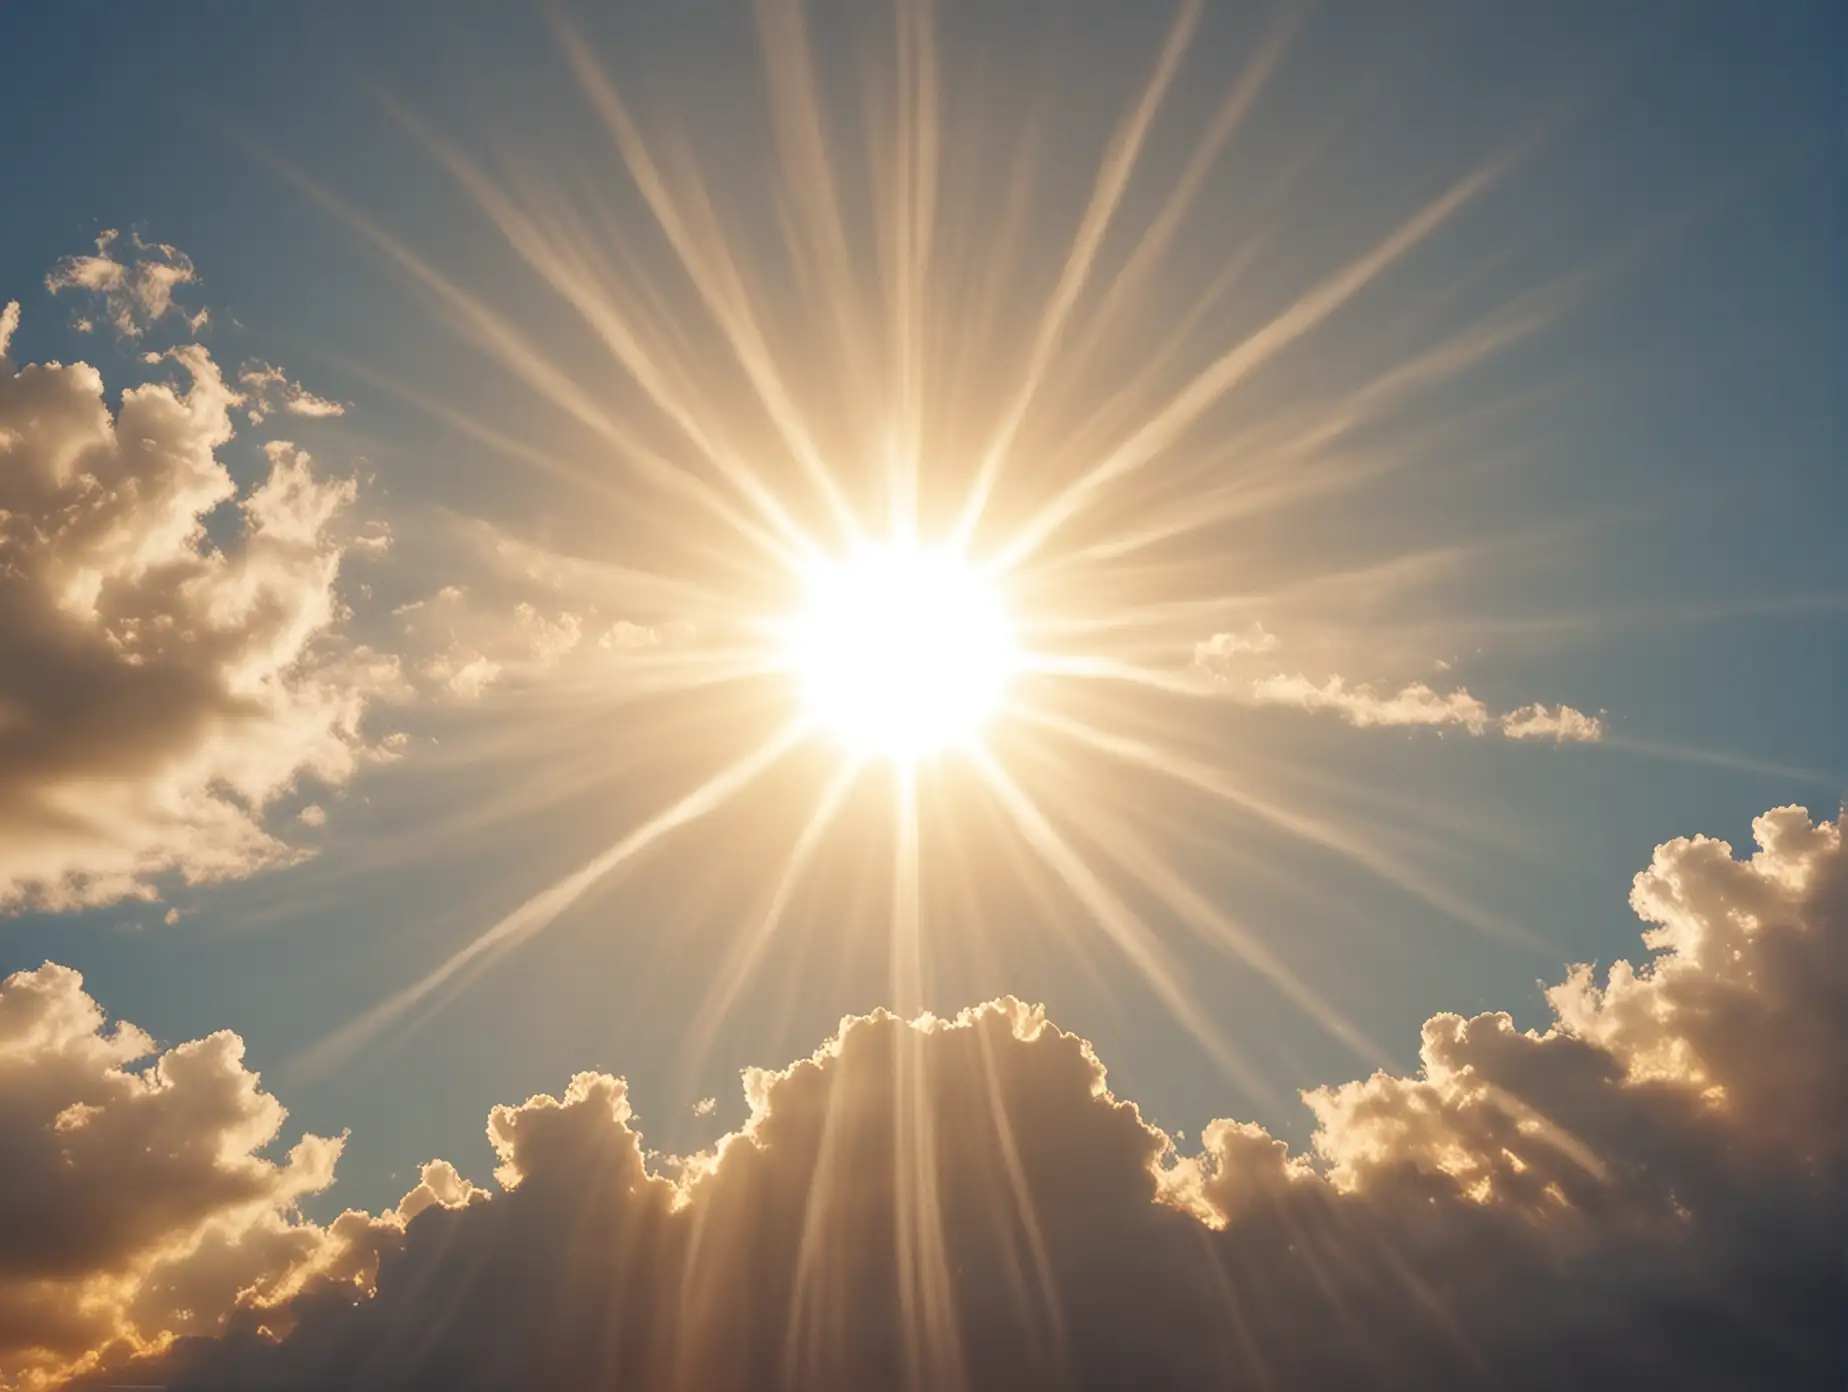 imagine a realistic photo of a sun shining in the sky

